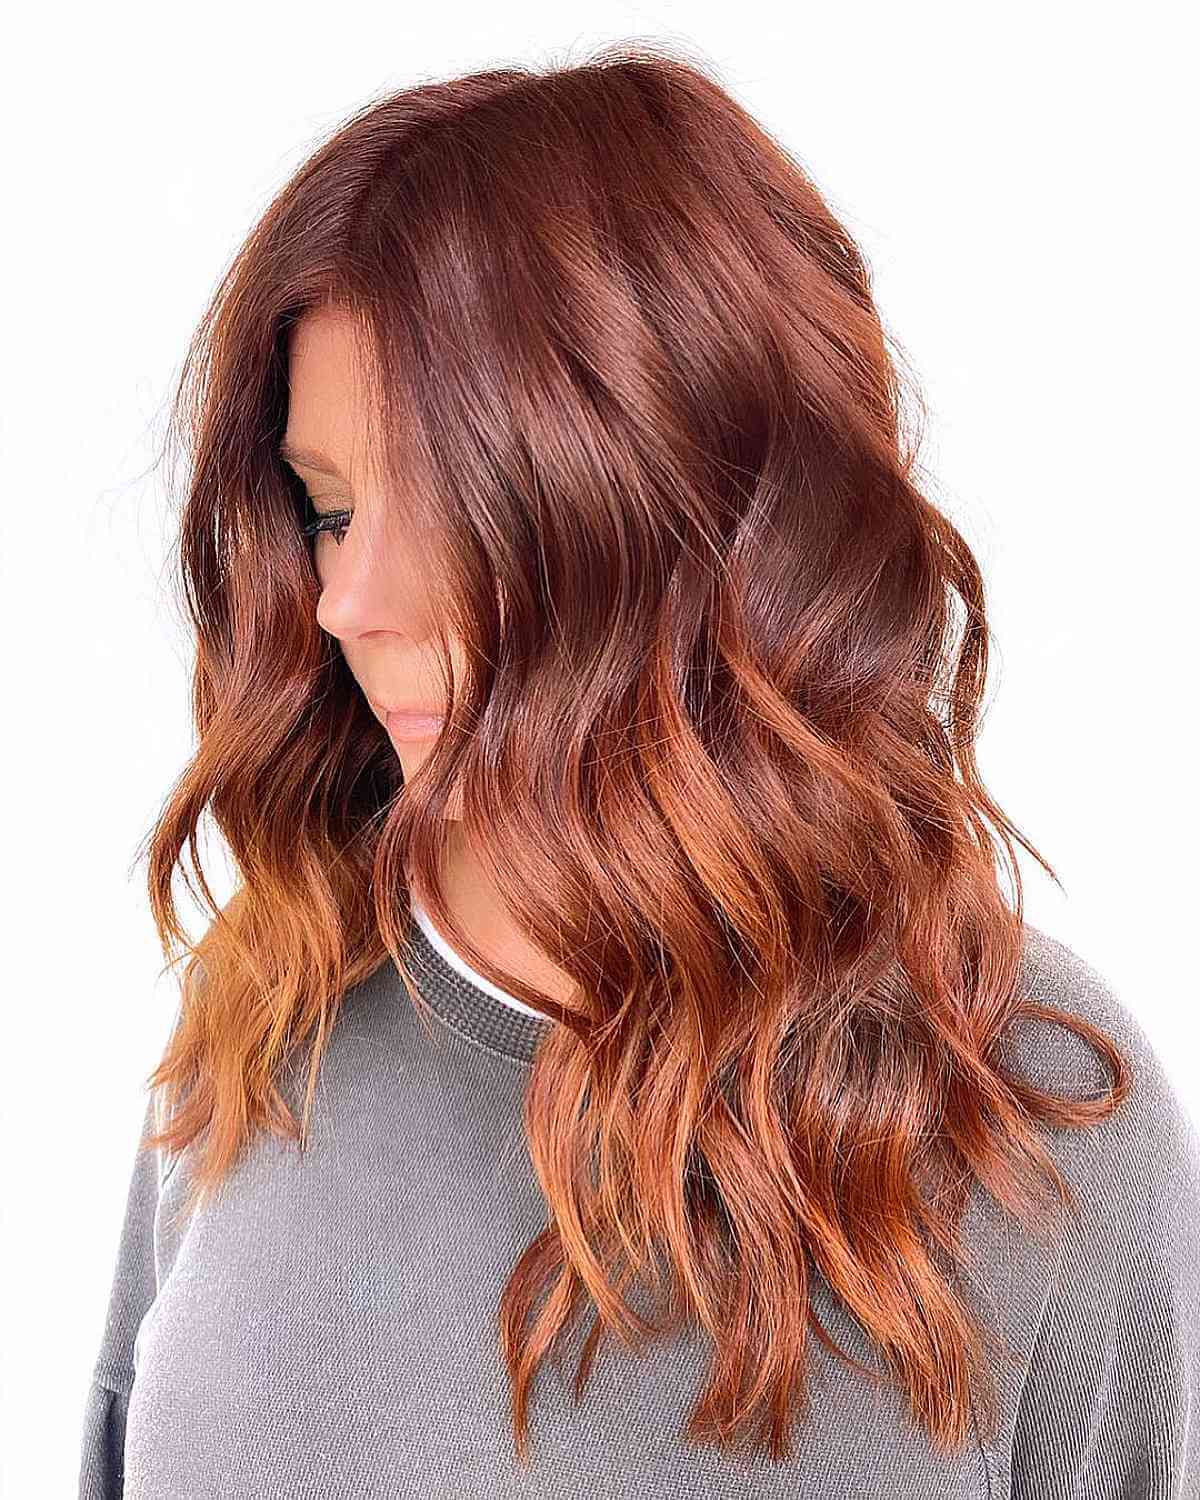 Mid-Back Copper Hair for Women Over 50 with Long Wavy Hair